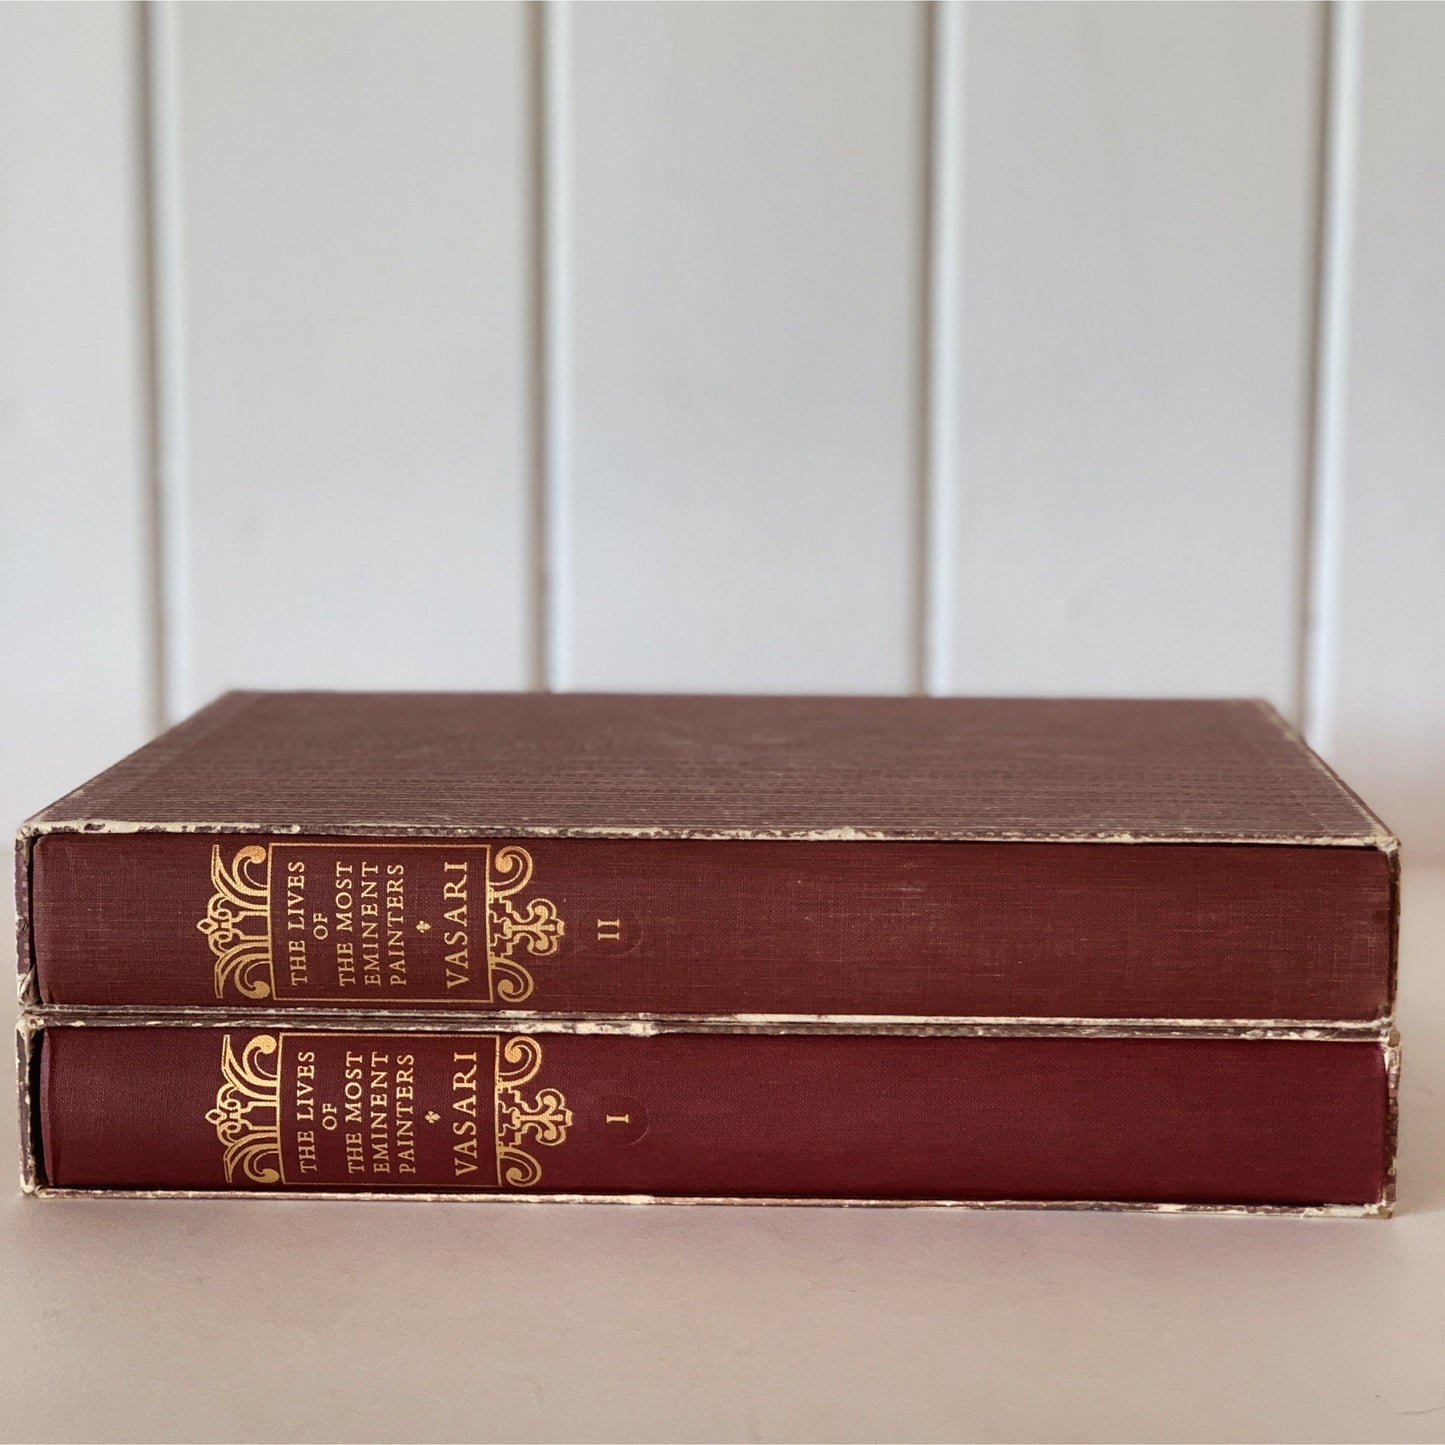 The Lives of the Most Eminent Painters, Heritage Press Slipcased Edition, 1967